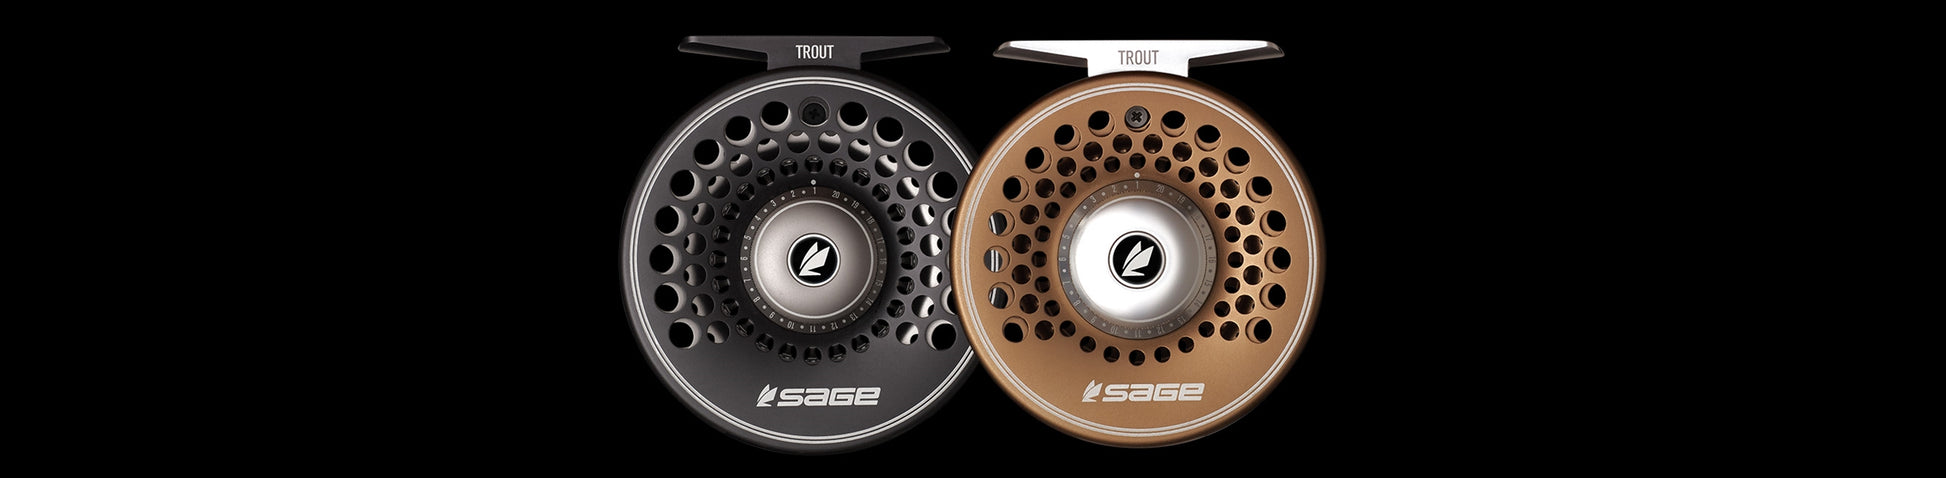 Sage Fly Fishing Click Fly Reel, Reels -  Canada